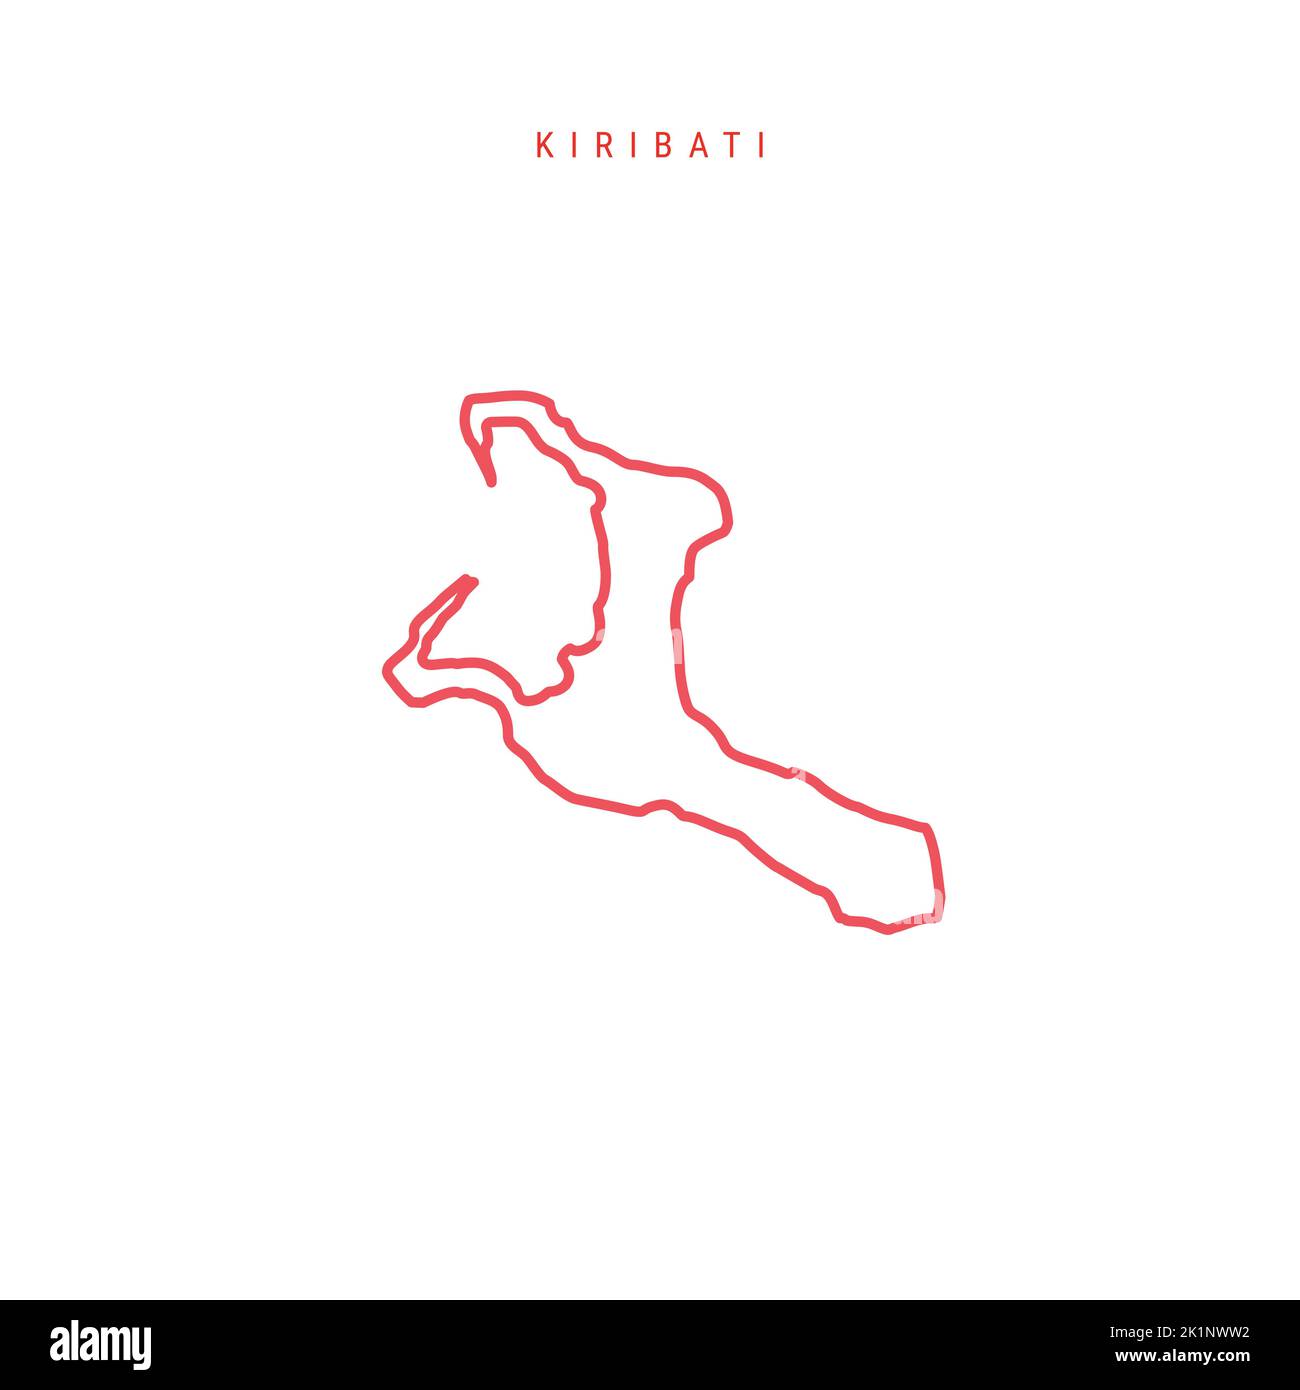 Kiribati editable outline map. Republic of Kiribati red border. Country name. Adjust line weight. Change to any color. Vector illustration. Stock Vector